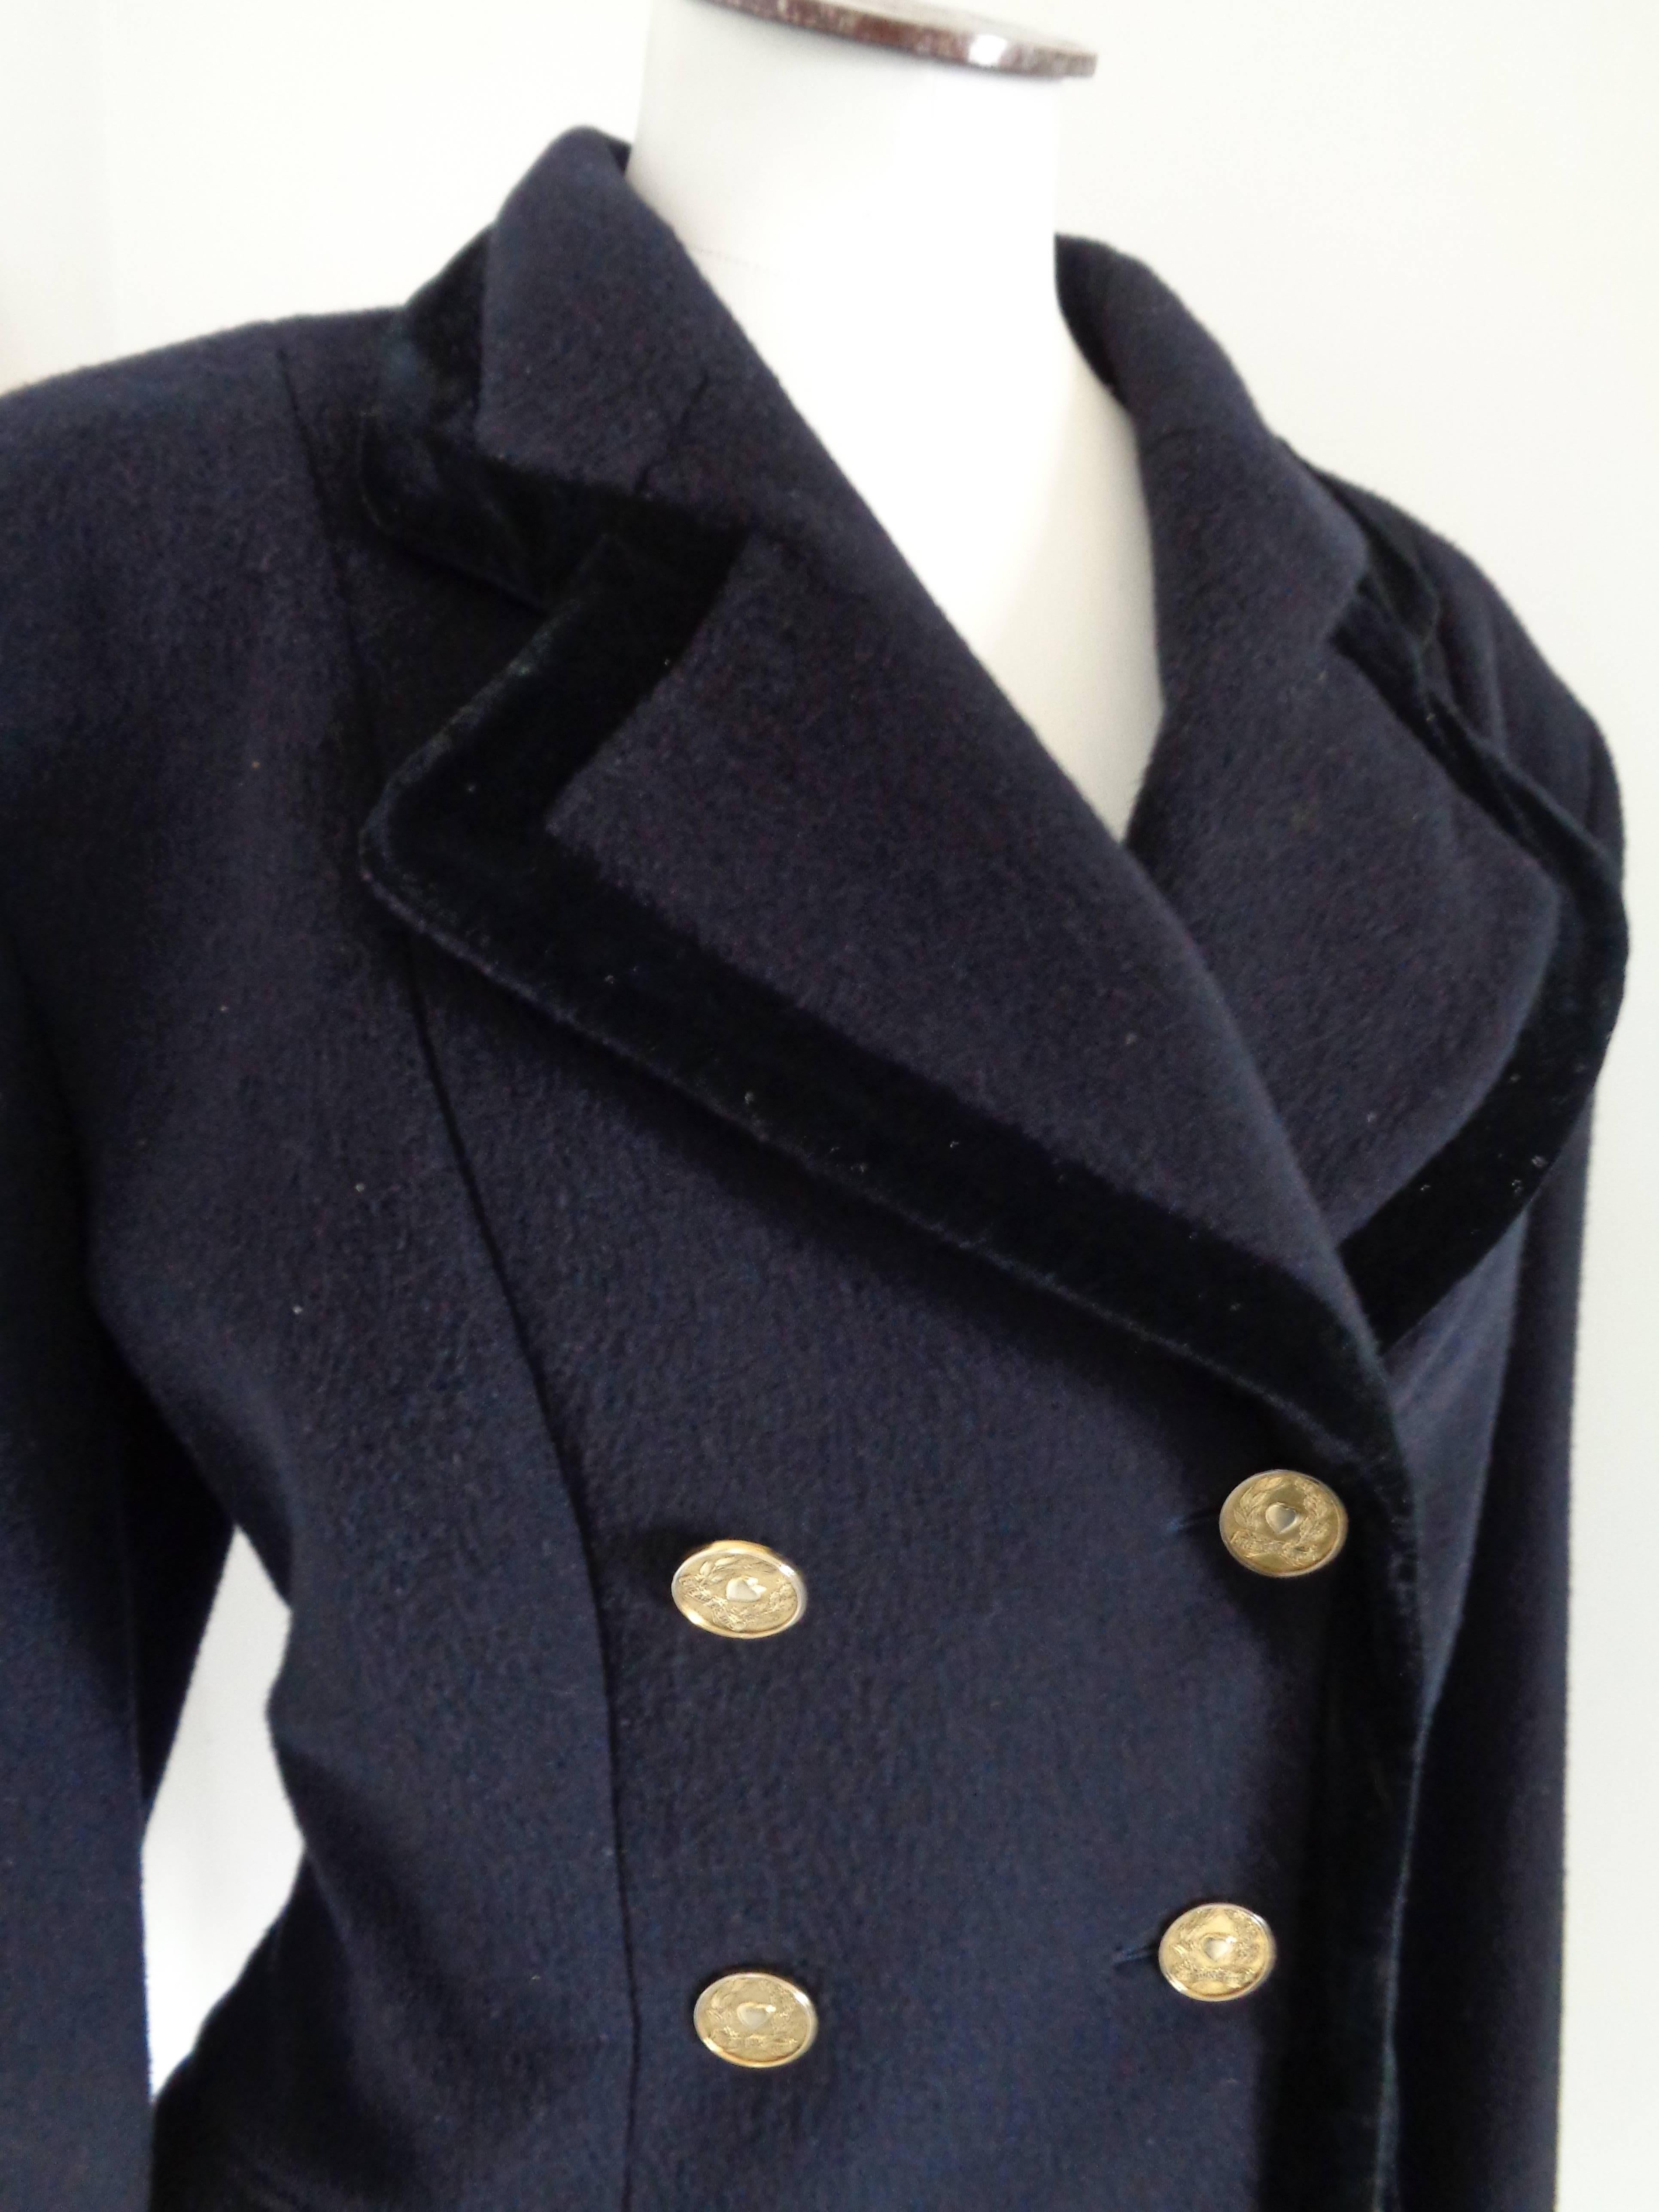 Moschino Cheap & Chic Blu wool Jacket

totally made in italy in size 48

Composition: Wool
Lining Rayon